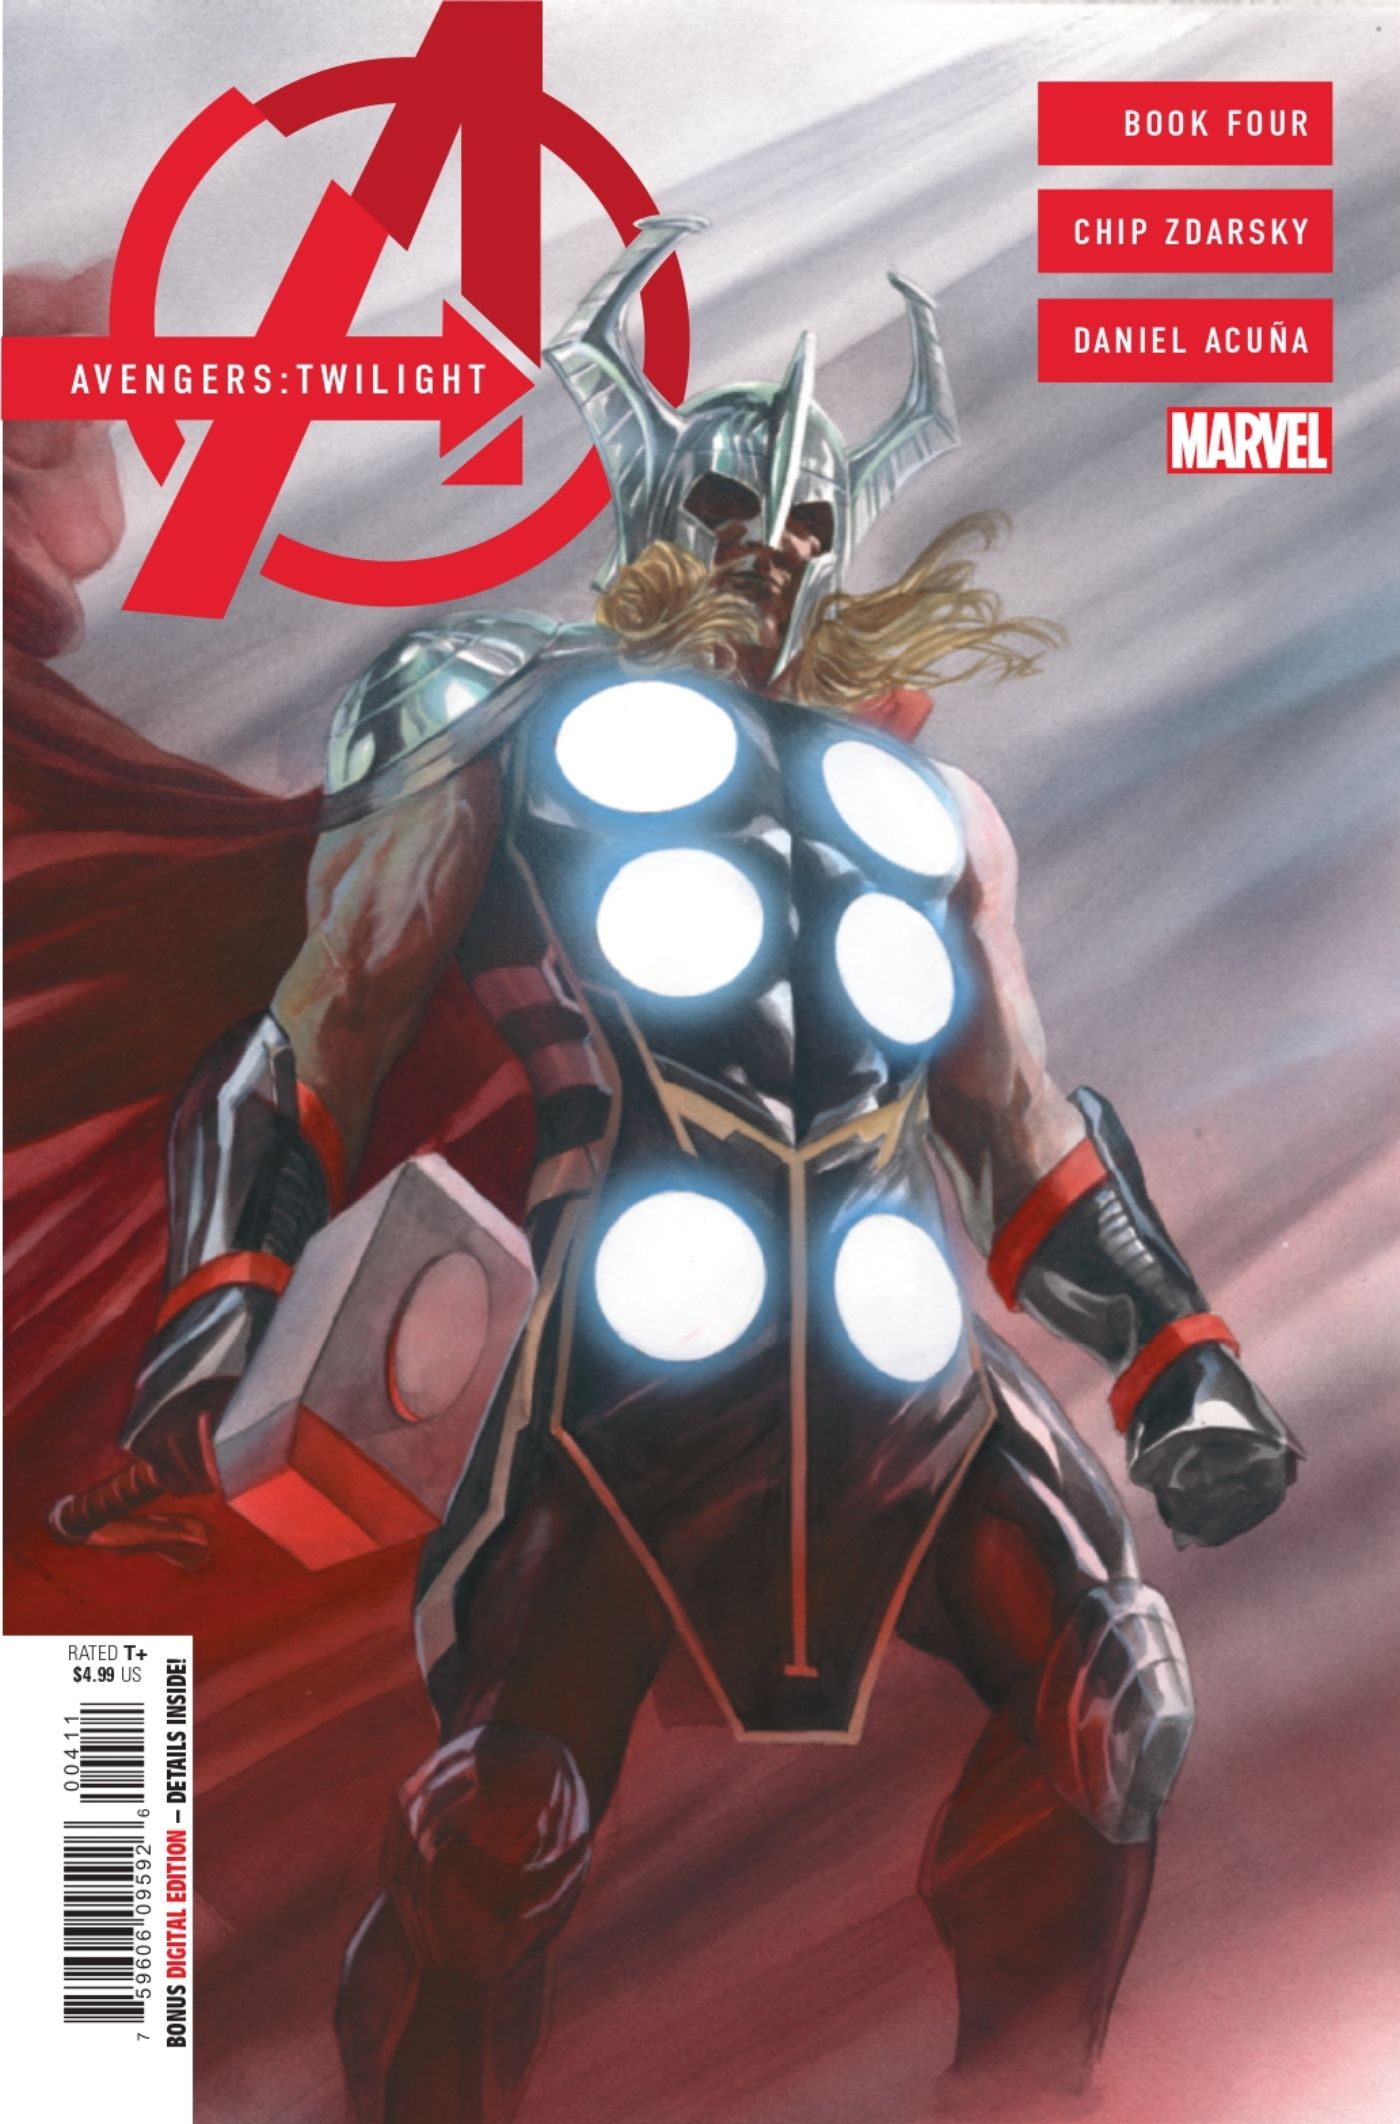 Avengers: Twilight #4 cover featuring Thor.